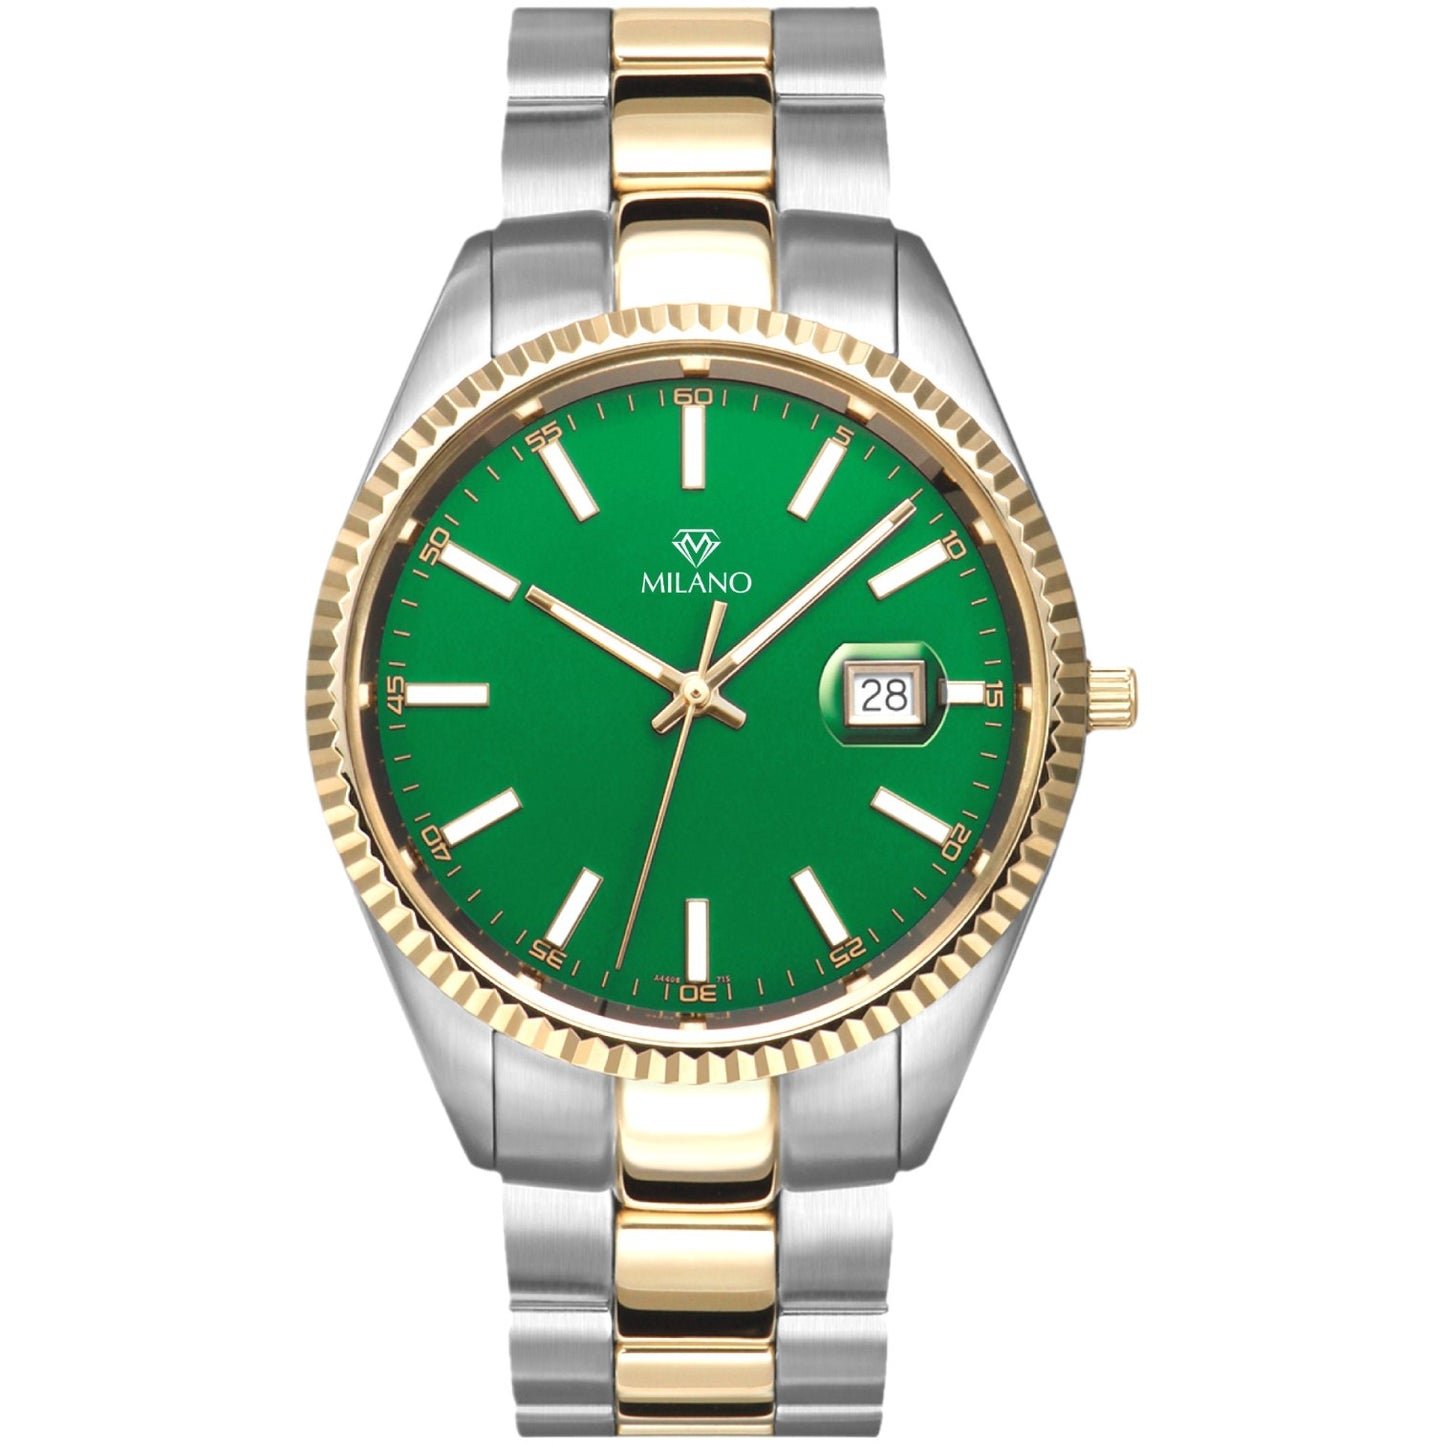 Two Tone Stainless Steel Milano Watch with Green Dial